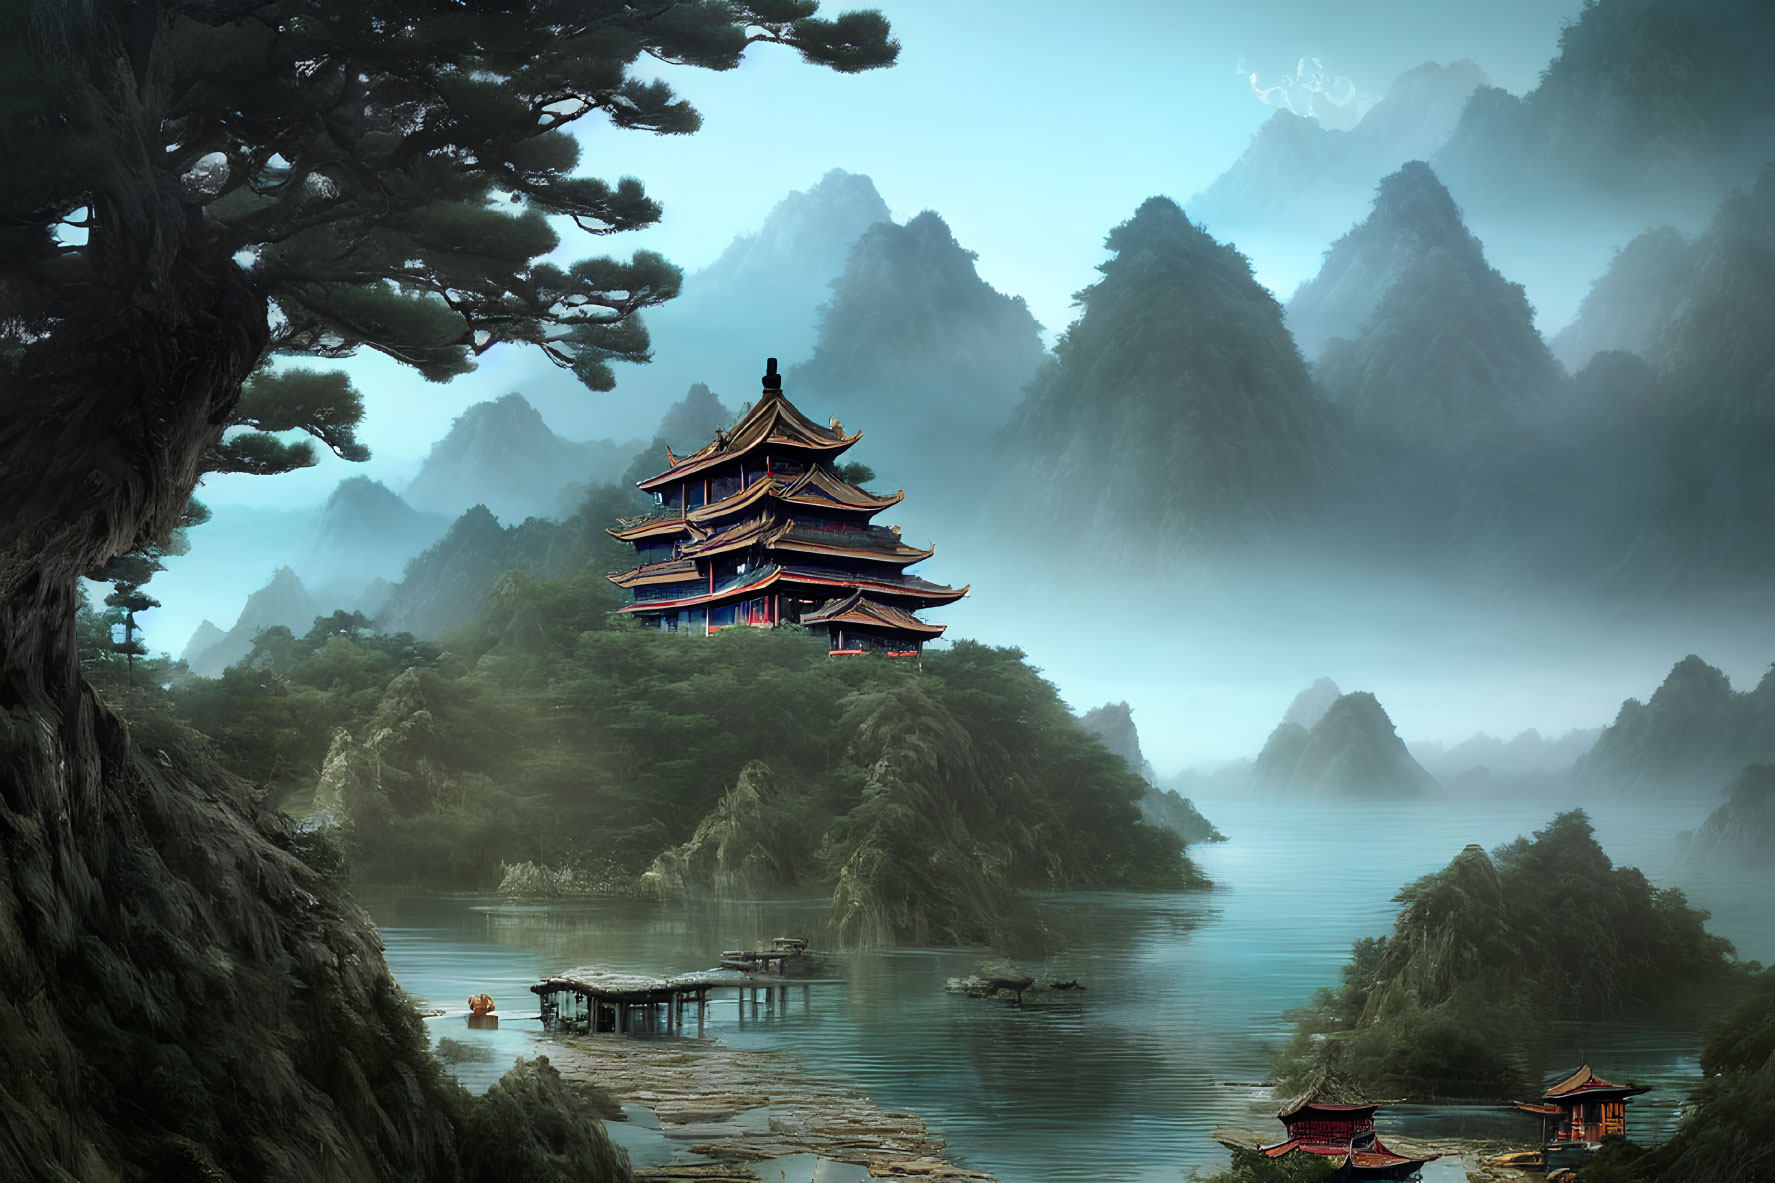 Traditional Pagoda in Misty Mountain Landscape with River and Boats